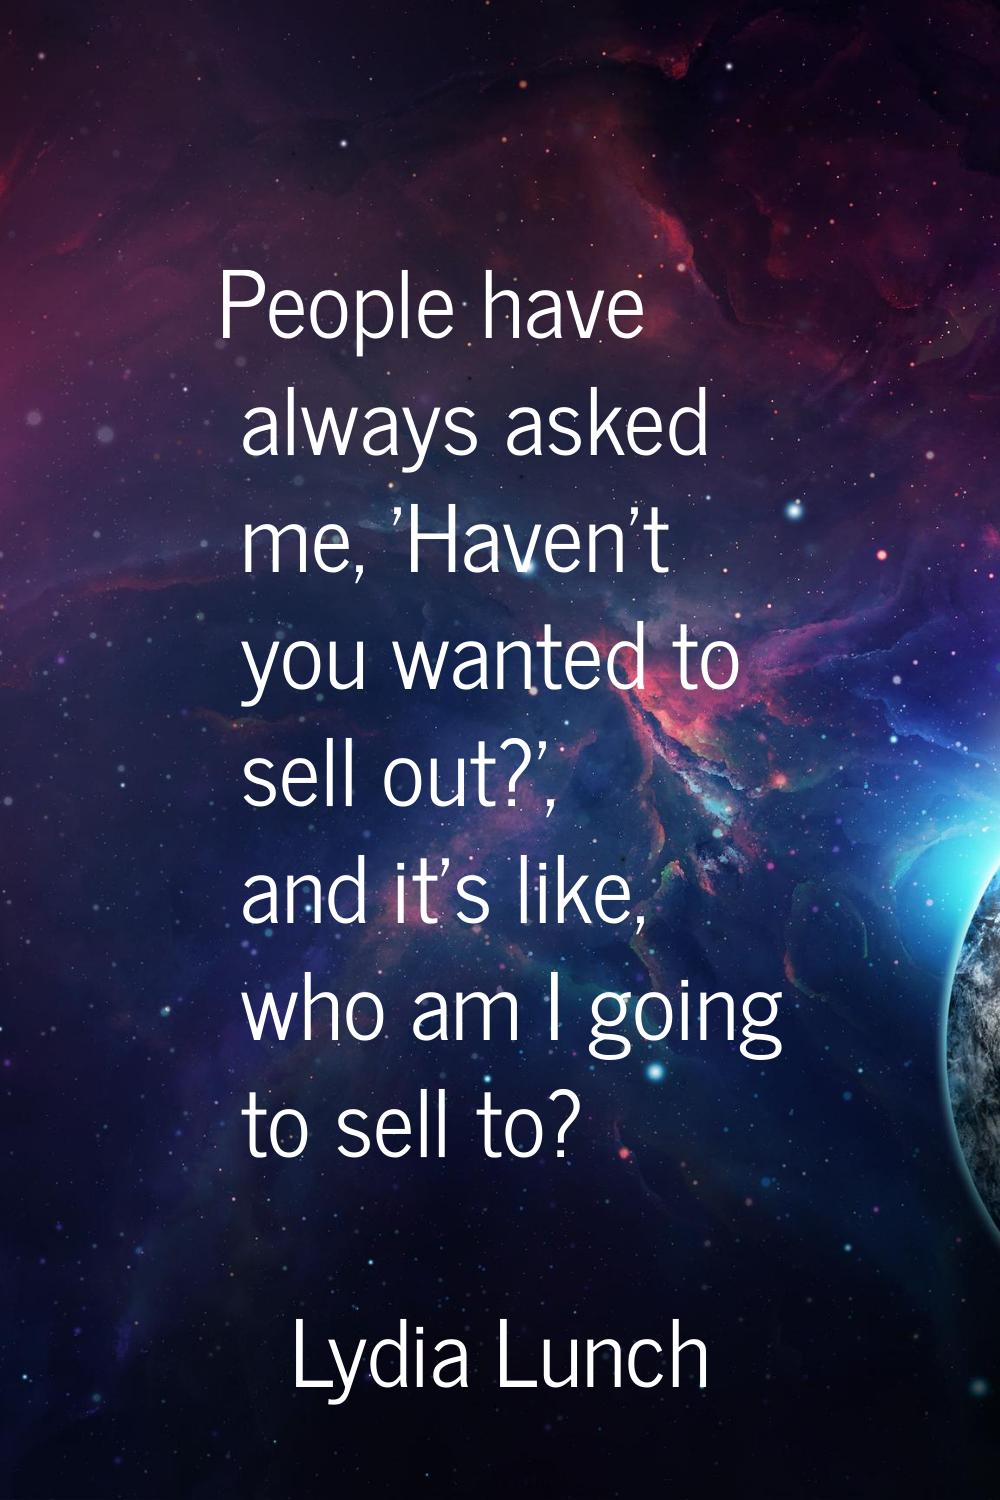 People have always asked me, 'Haven't you wanted to sell out?', and it's like, who am I going to se